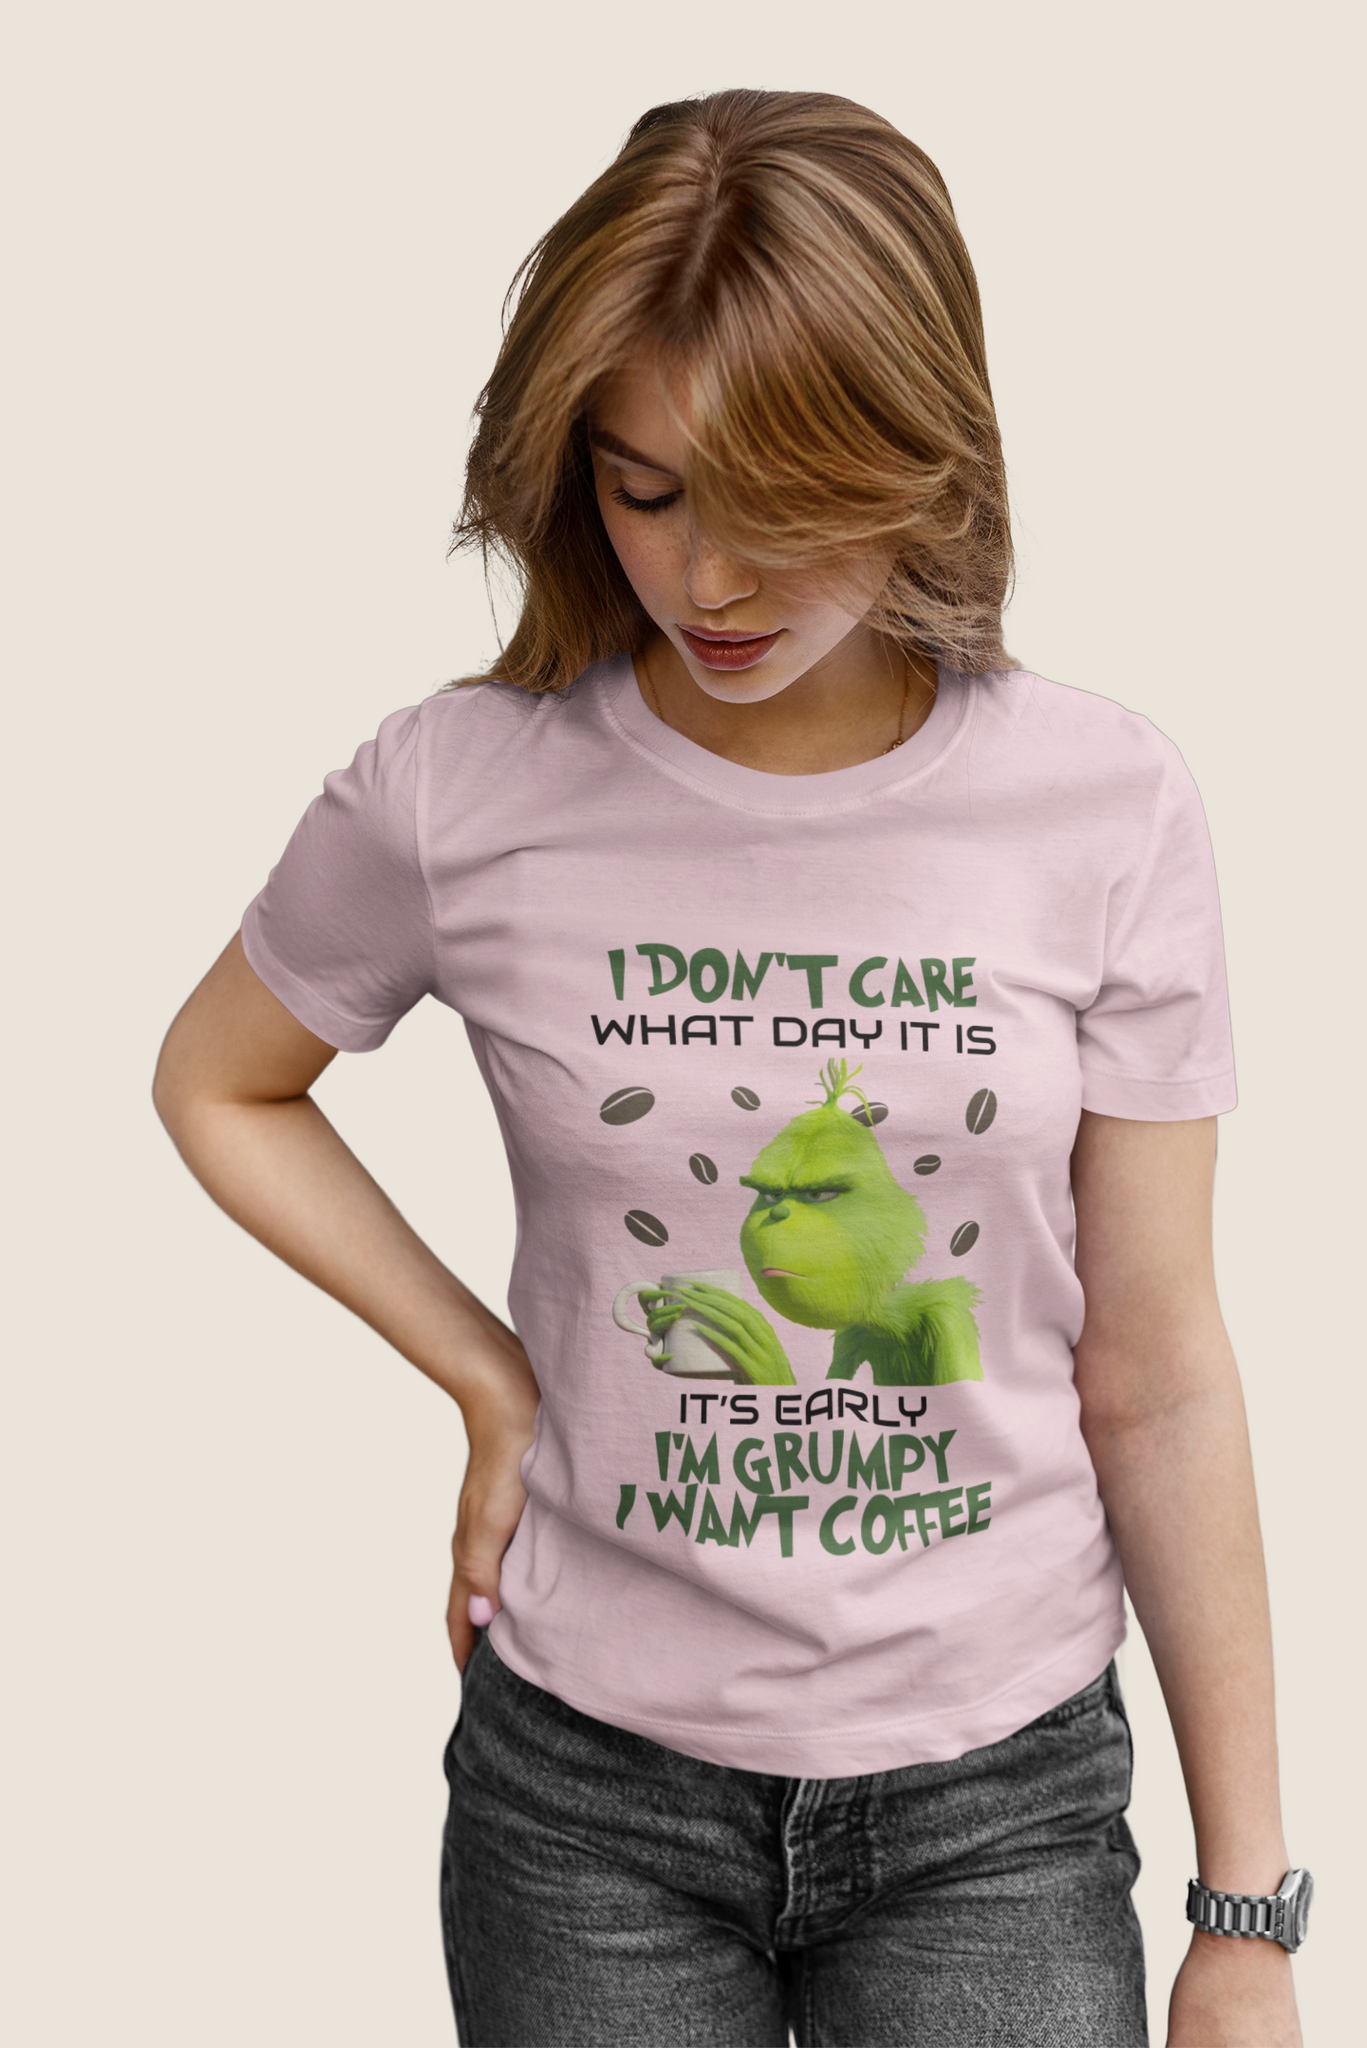 Grinch T Shirt, I Dont Care What Day It Is T Shirt, Its Early Im Grumpy I Want Coffee Tshirt, Christmas Gifts